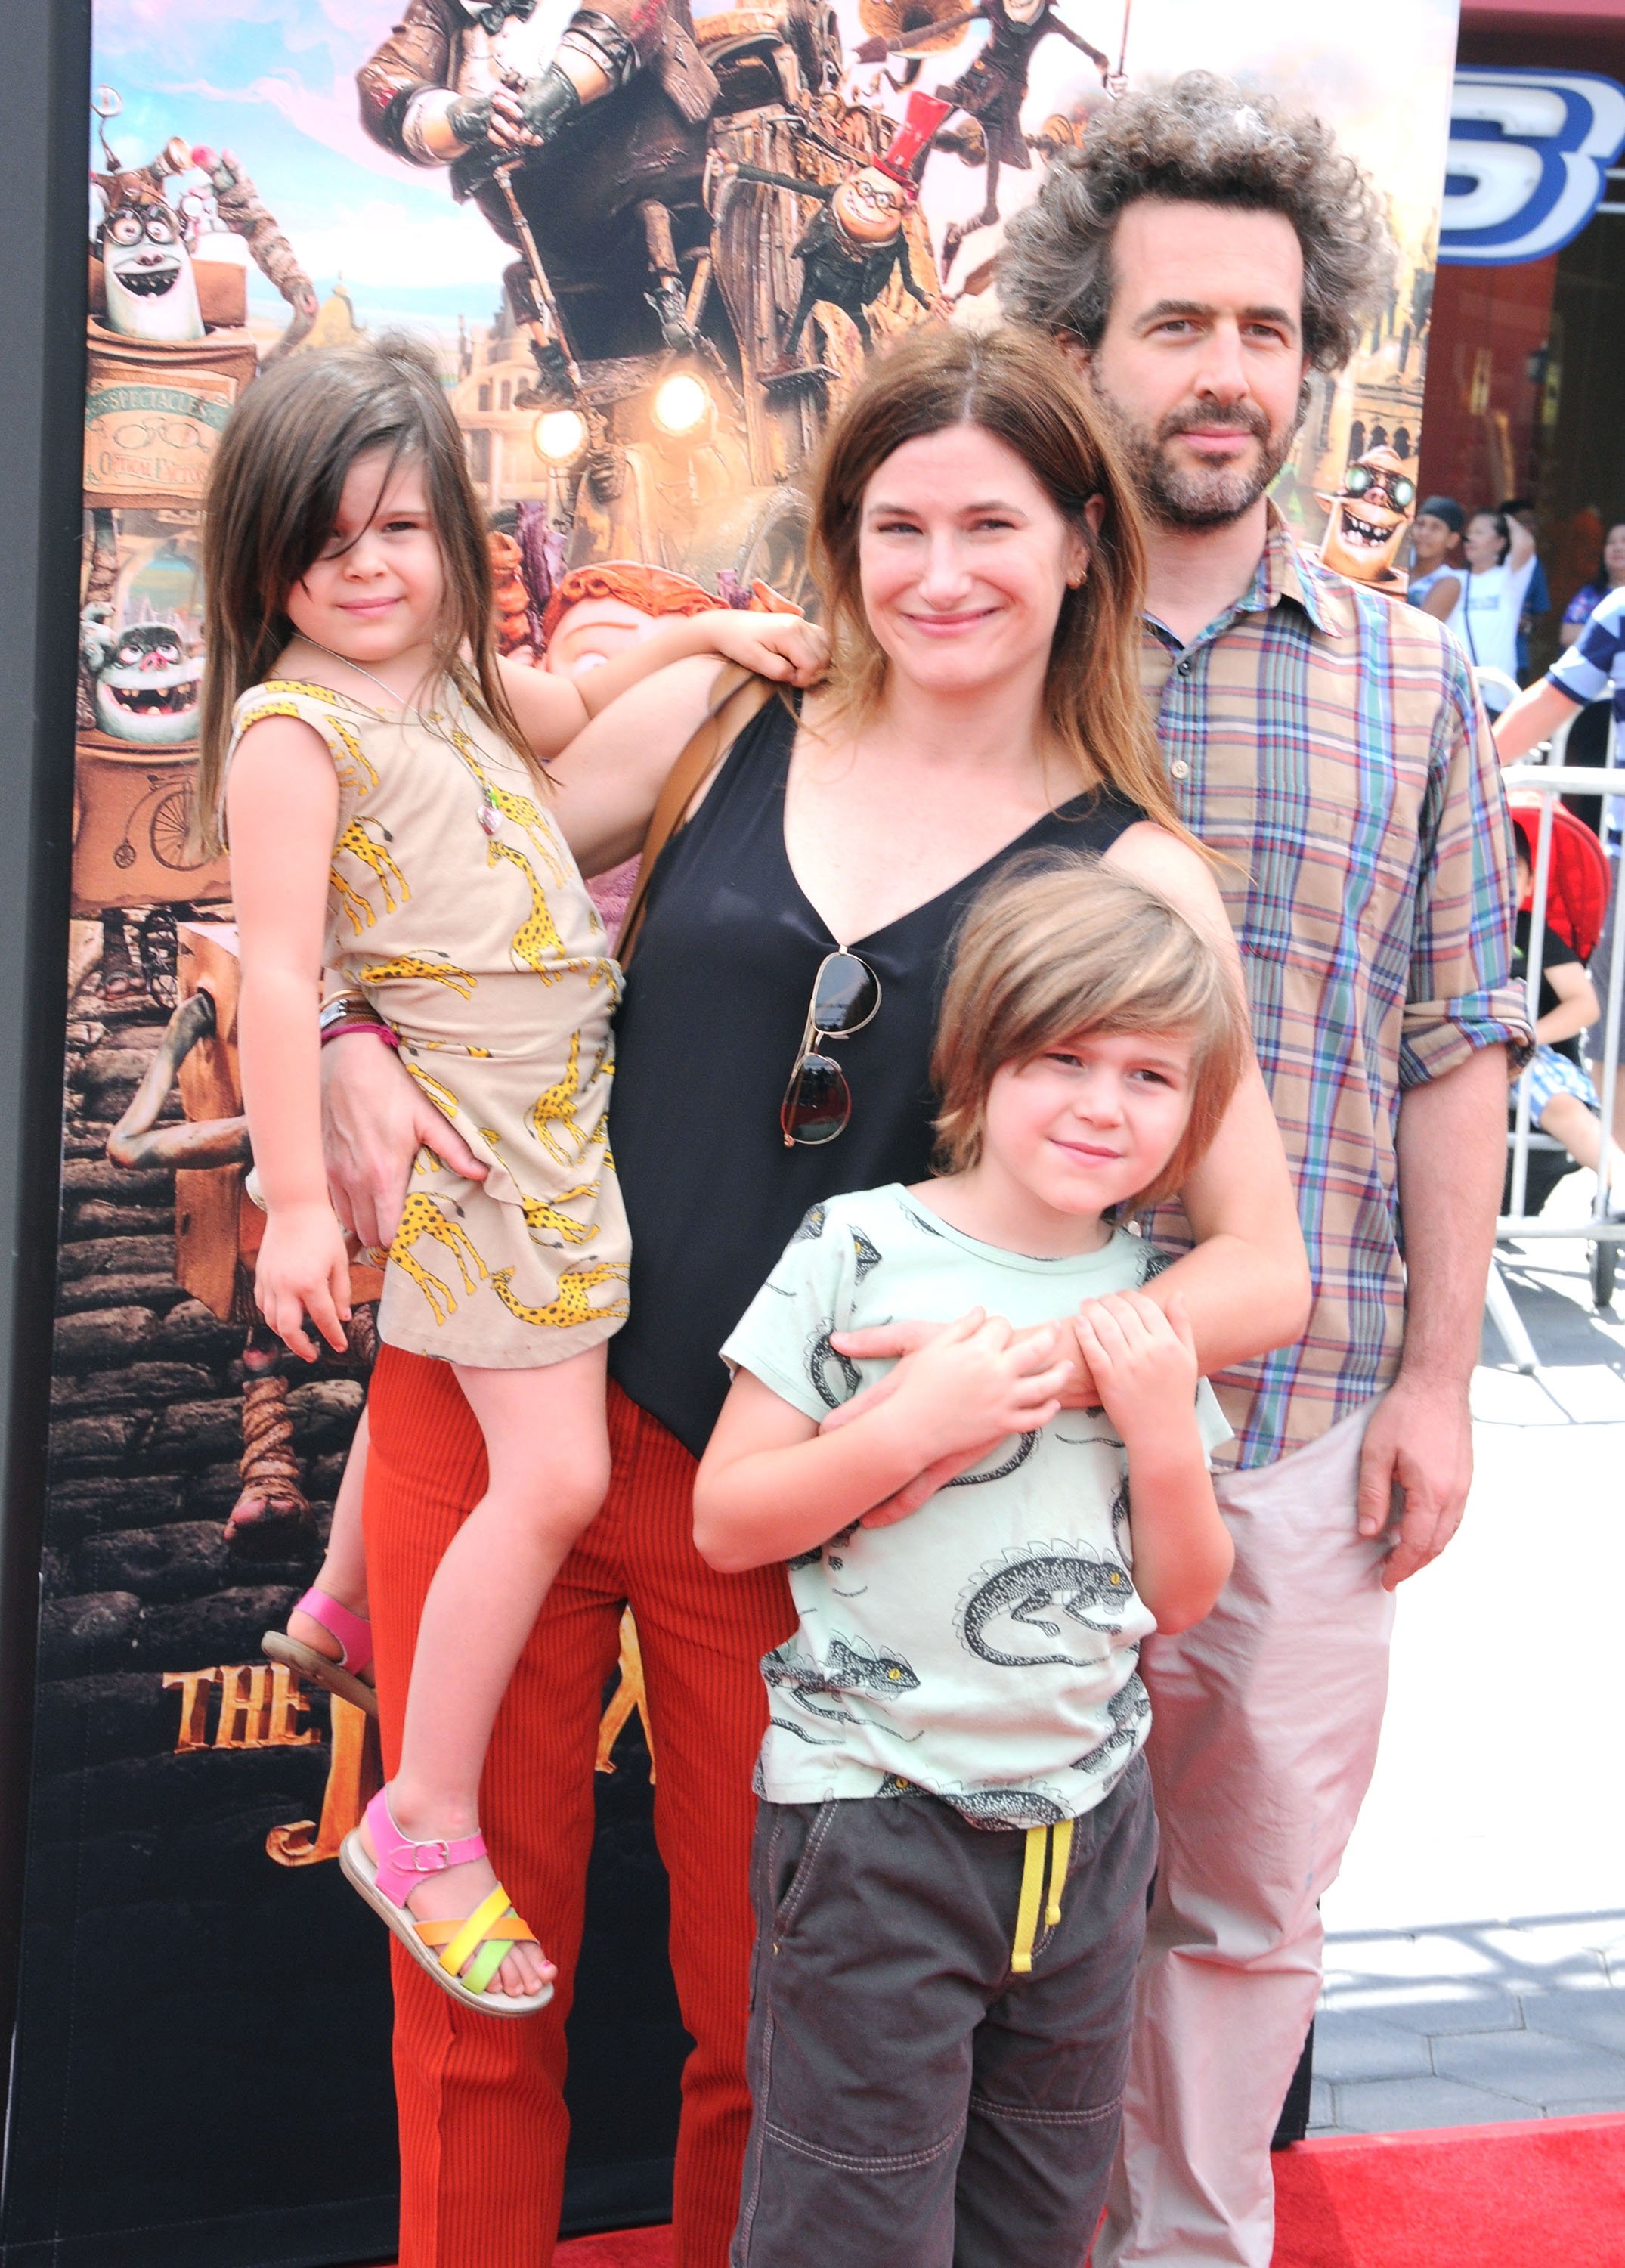 Mae Sandler, Kathryn Hahn, Leonard Sandler and Ethan Sandler attend the premiere of 'The Boxtrolls' at Universal CityWalk in Universal City, California on September 21, 2014 | Source: Getty Images